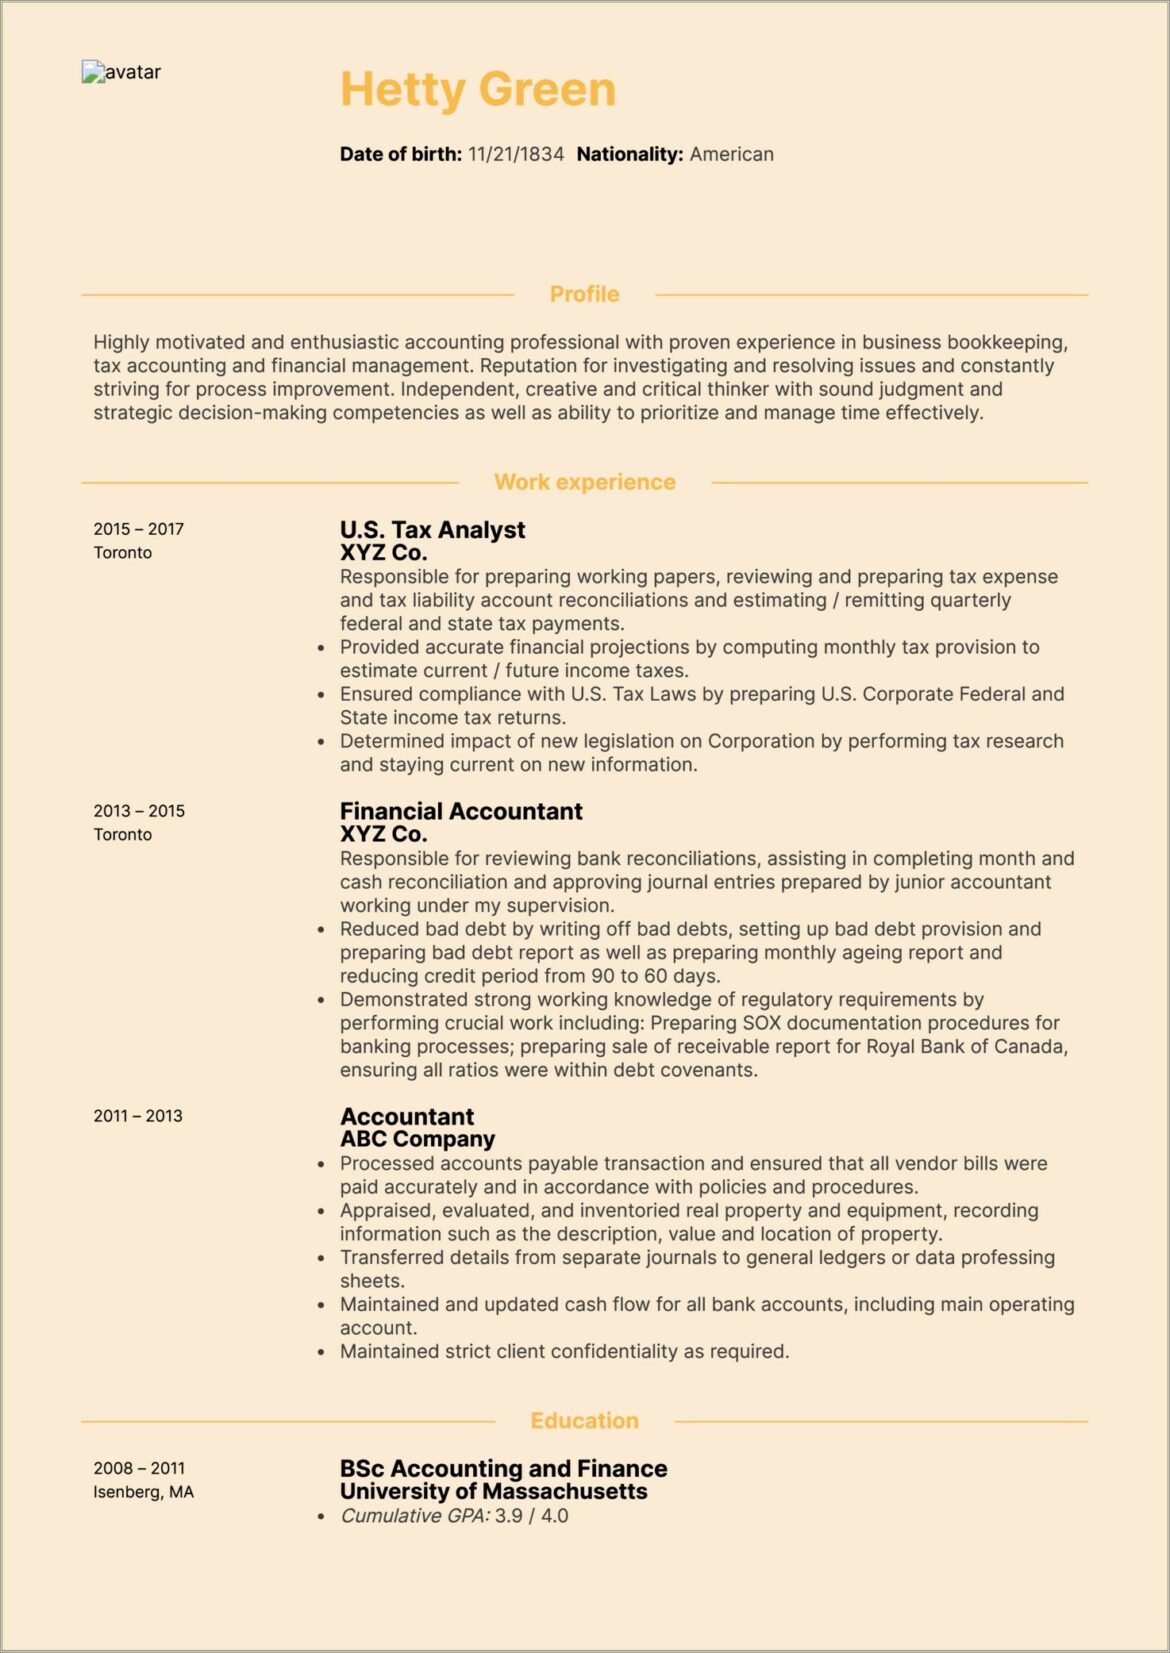 Sample Resume With Big 4 Tax Intern Experience